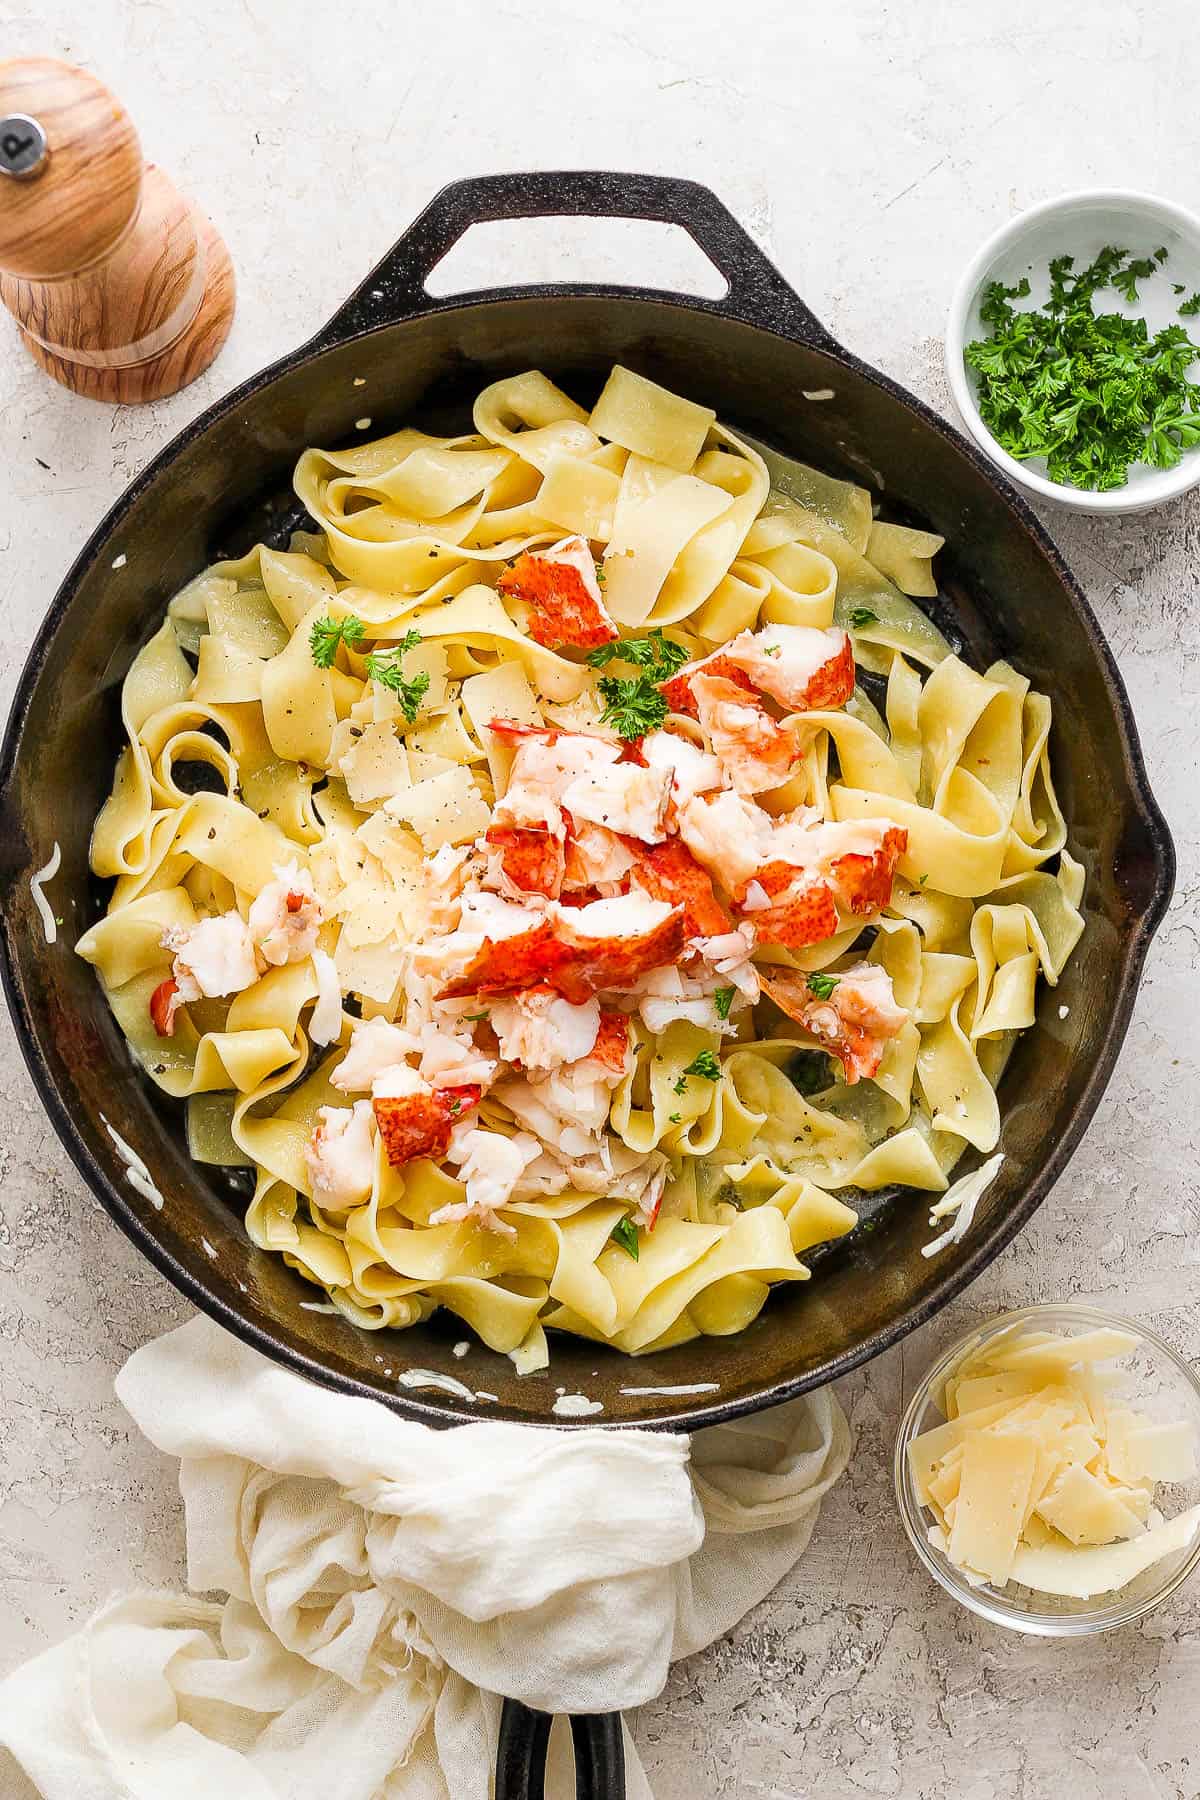 Lobster meat added to the pasta in the skillet.